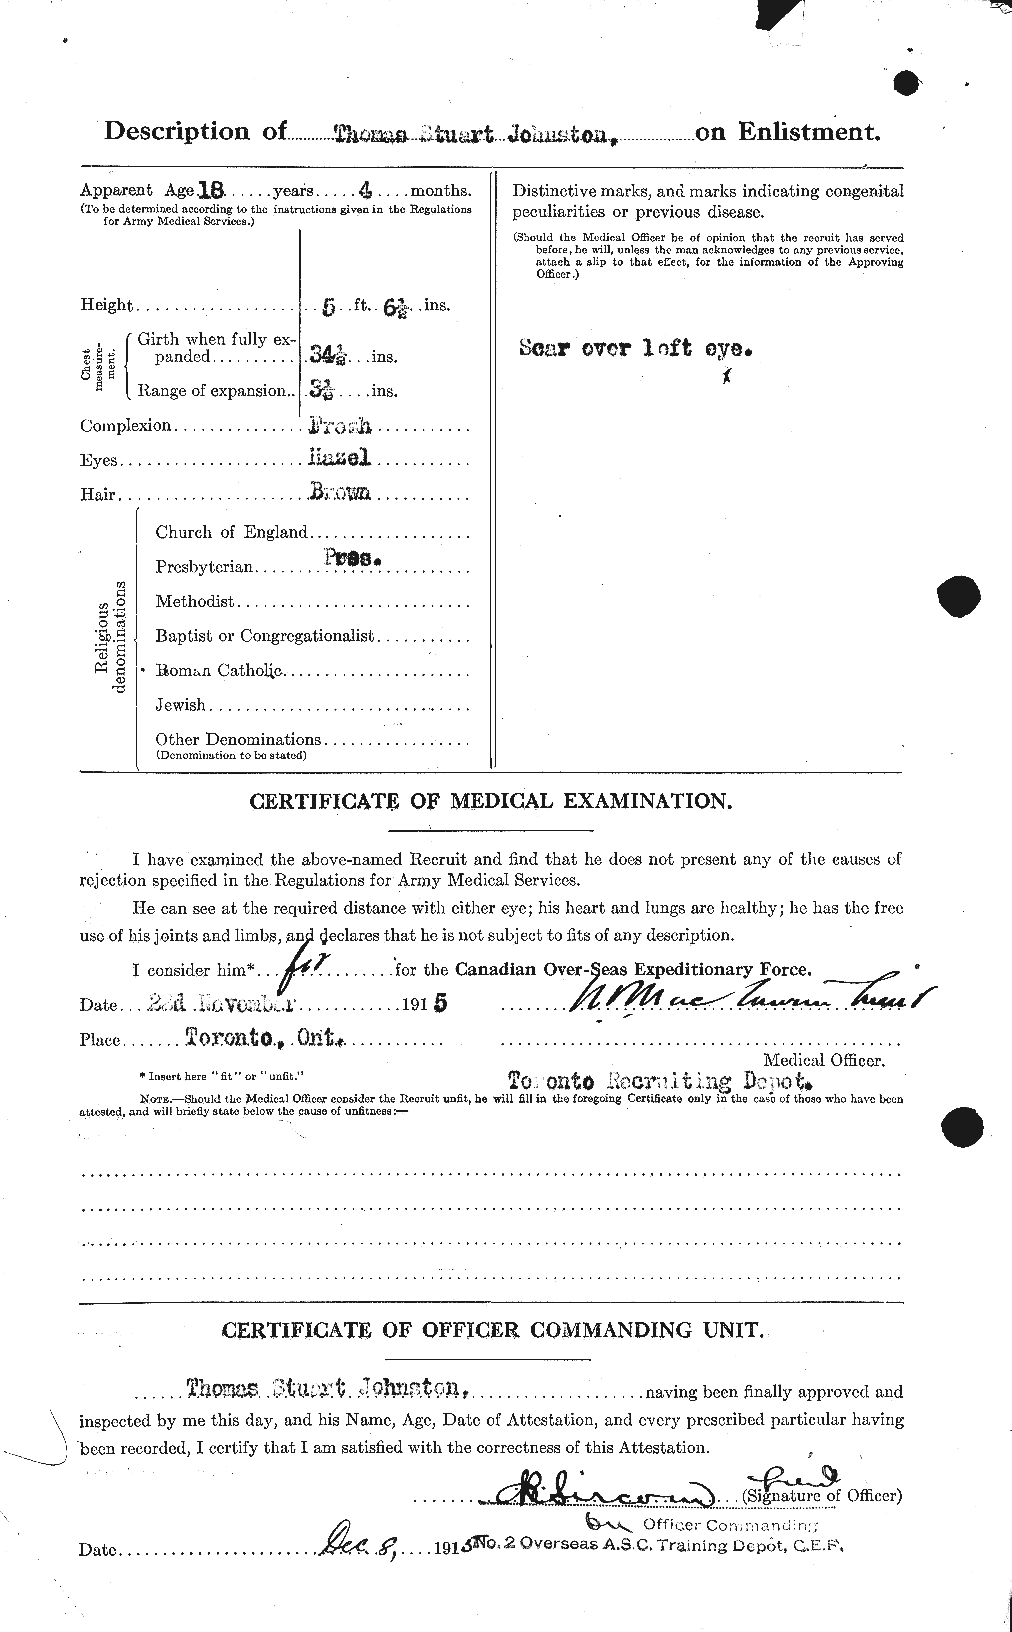 Personnel Records of the First World War - CEF 427176b